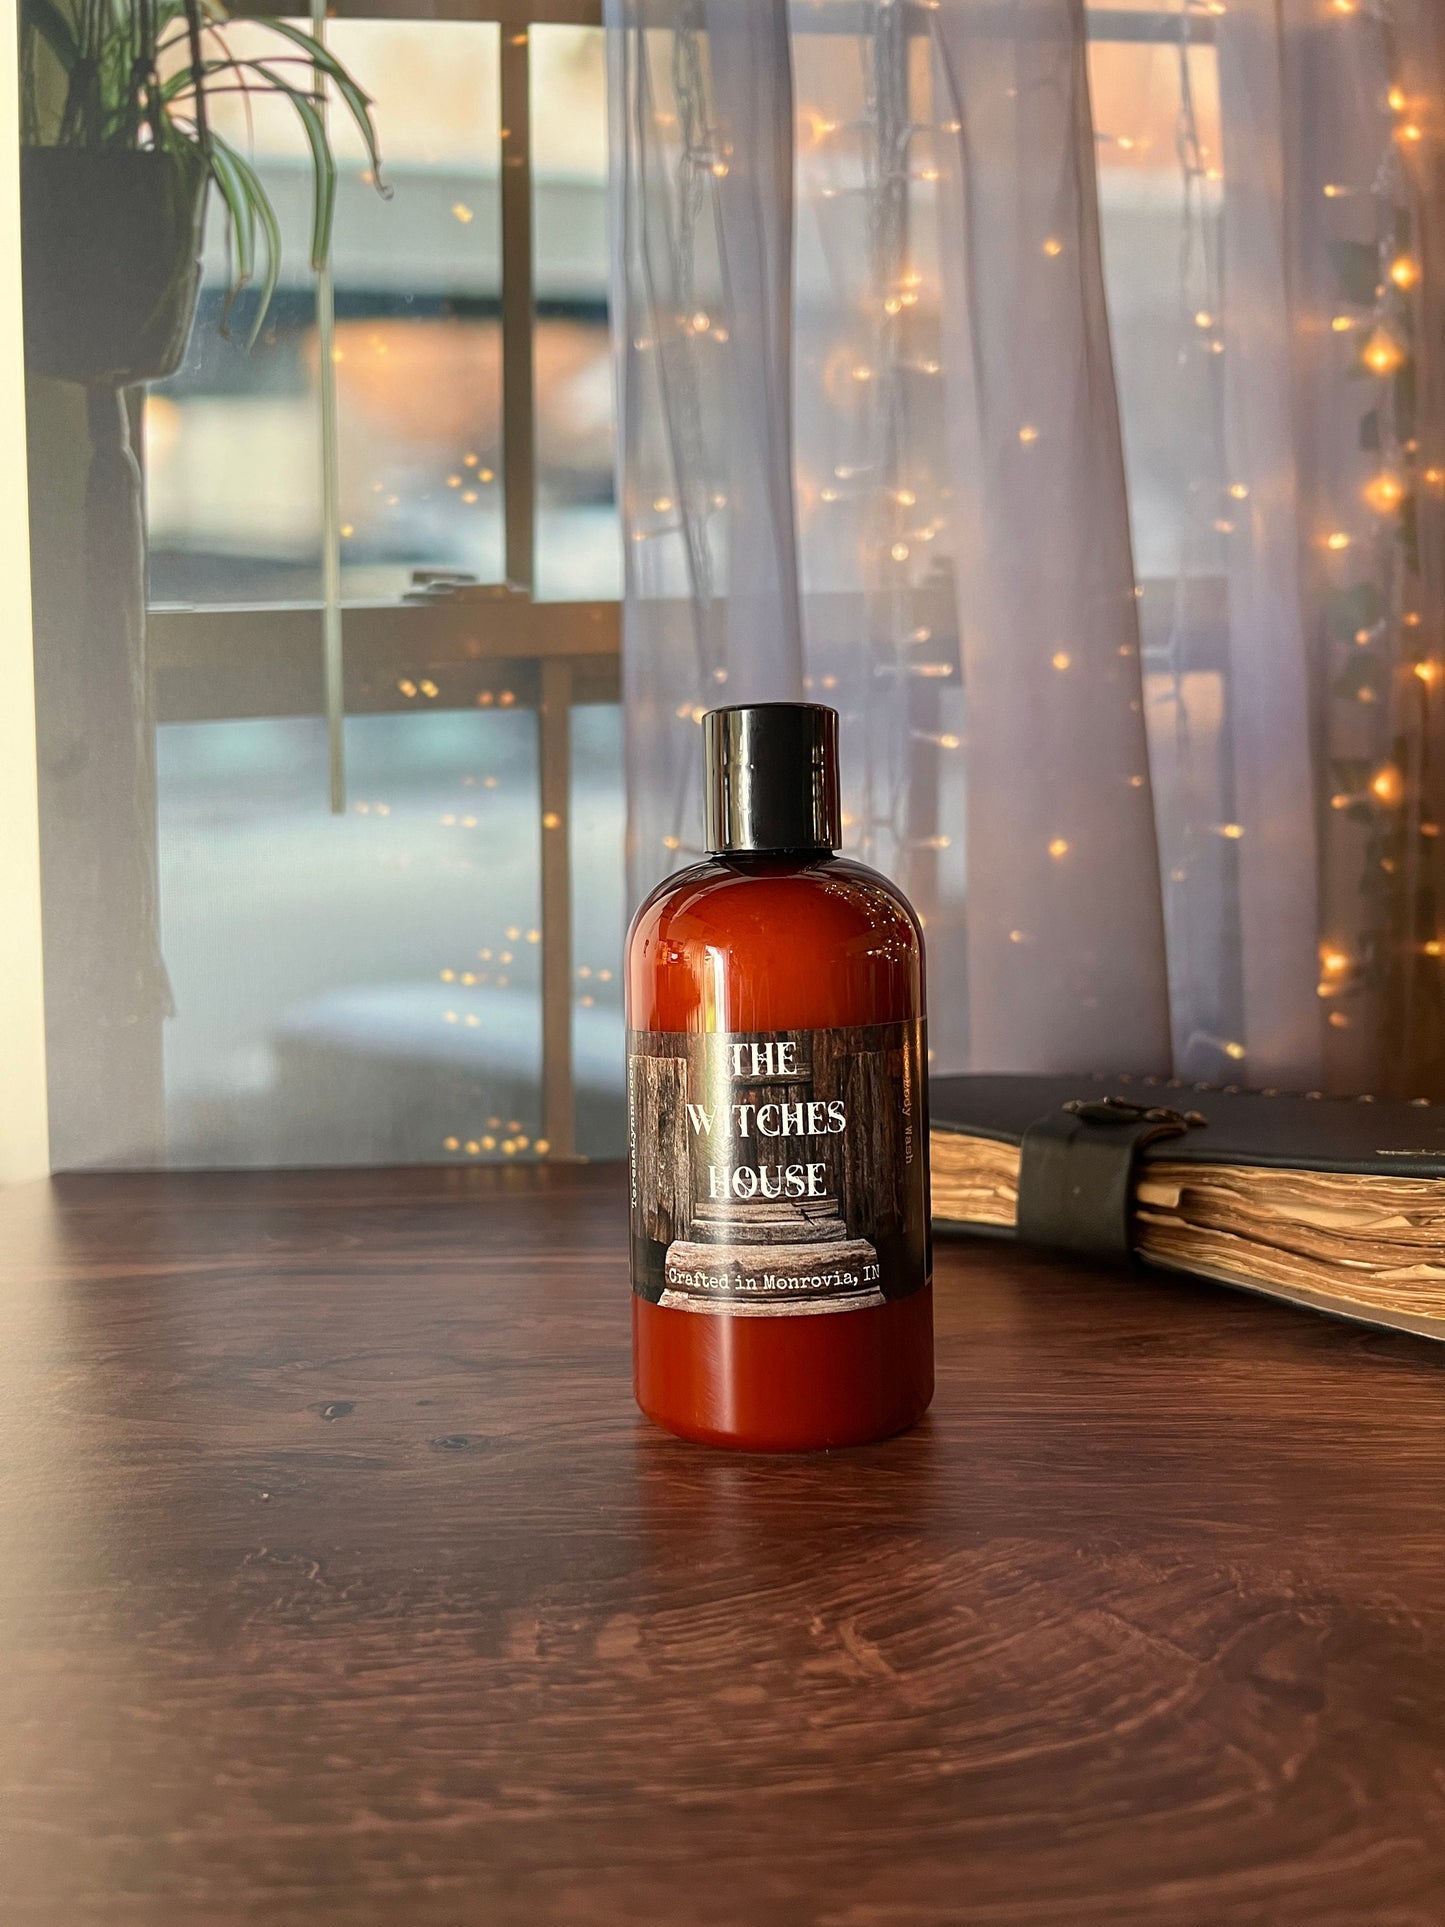 Witches House Body Wash, luxury scent